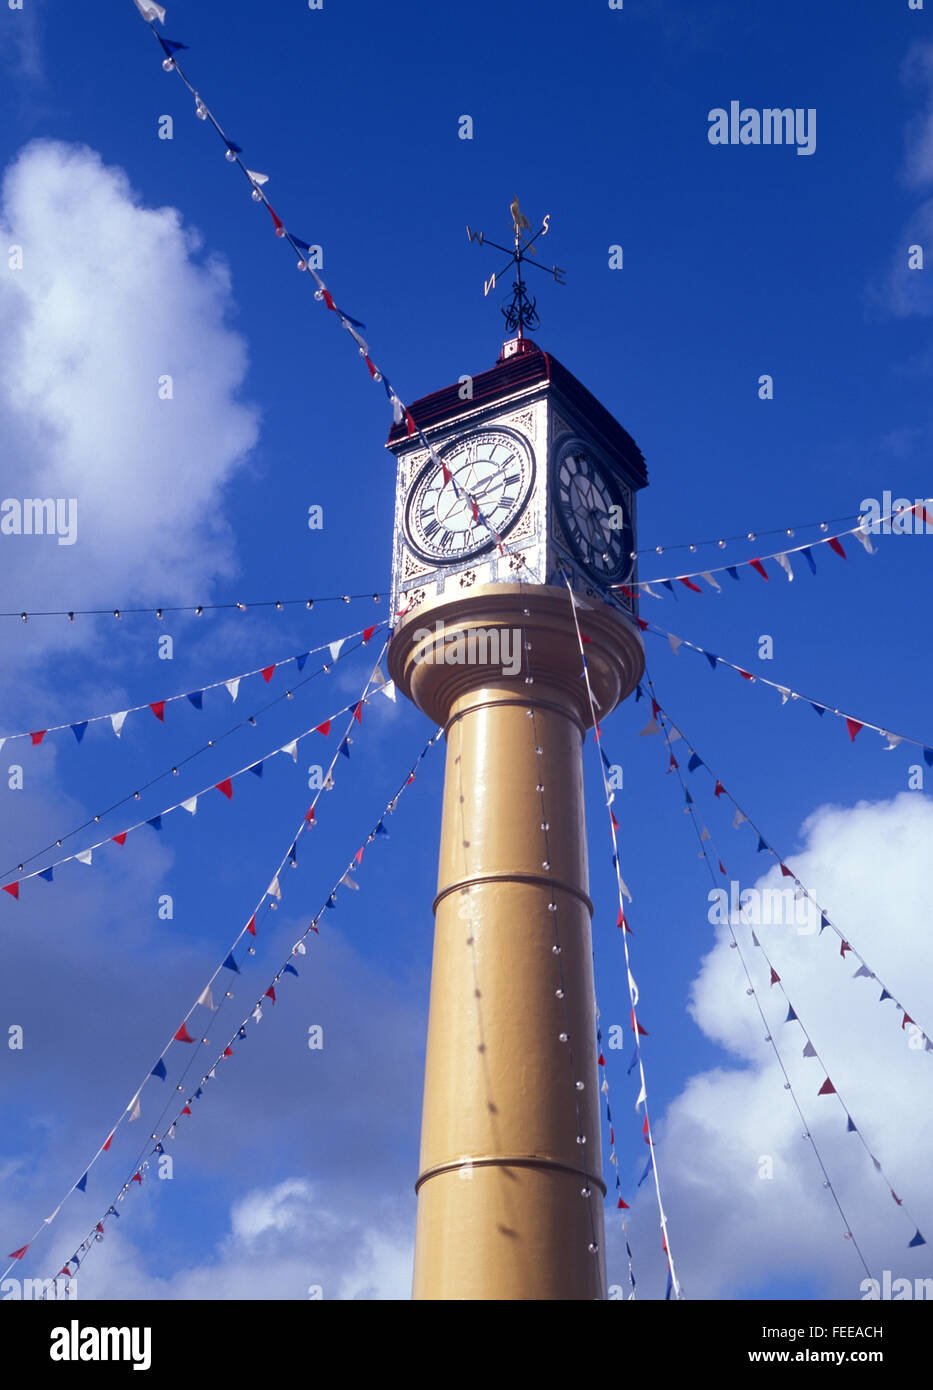 Tredegar Town Clock Blaenau Gwent Valleys South Wales UK Banque D'Images